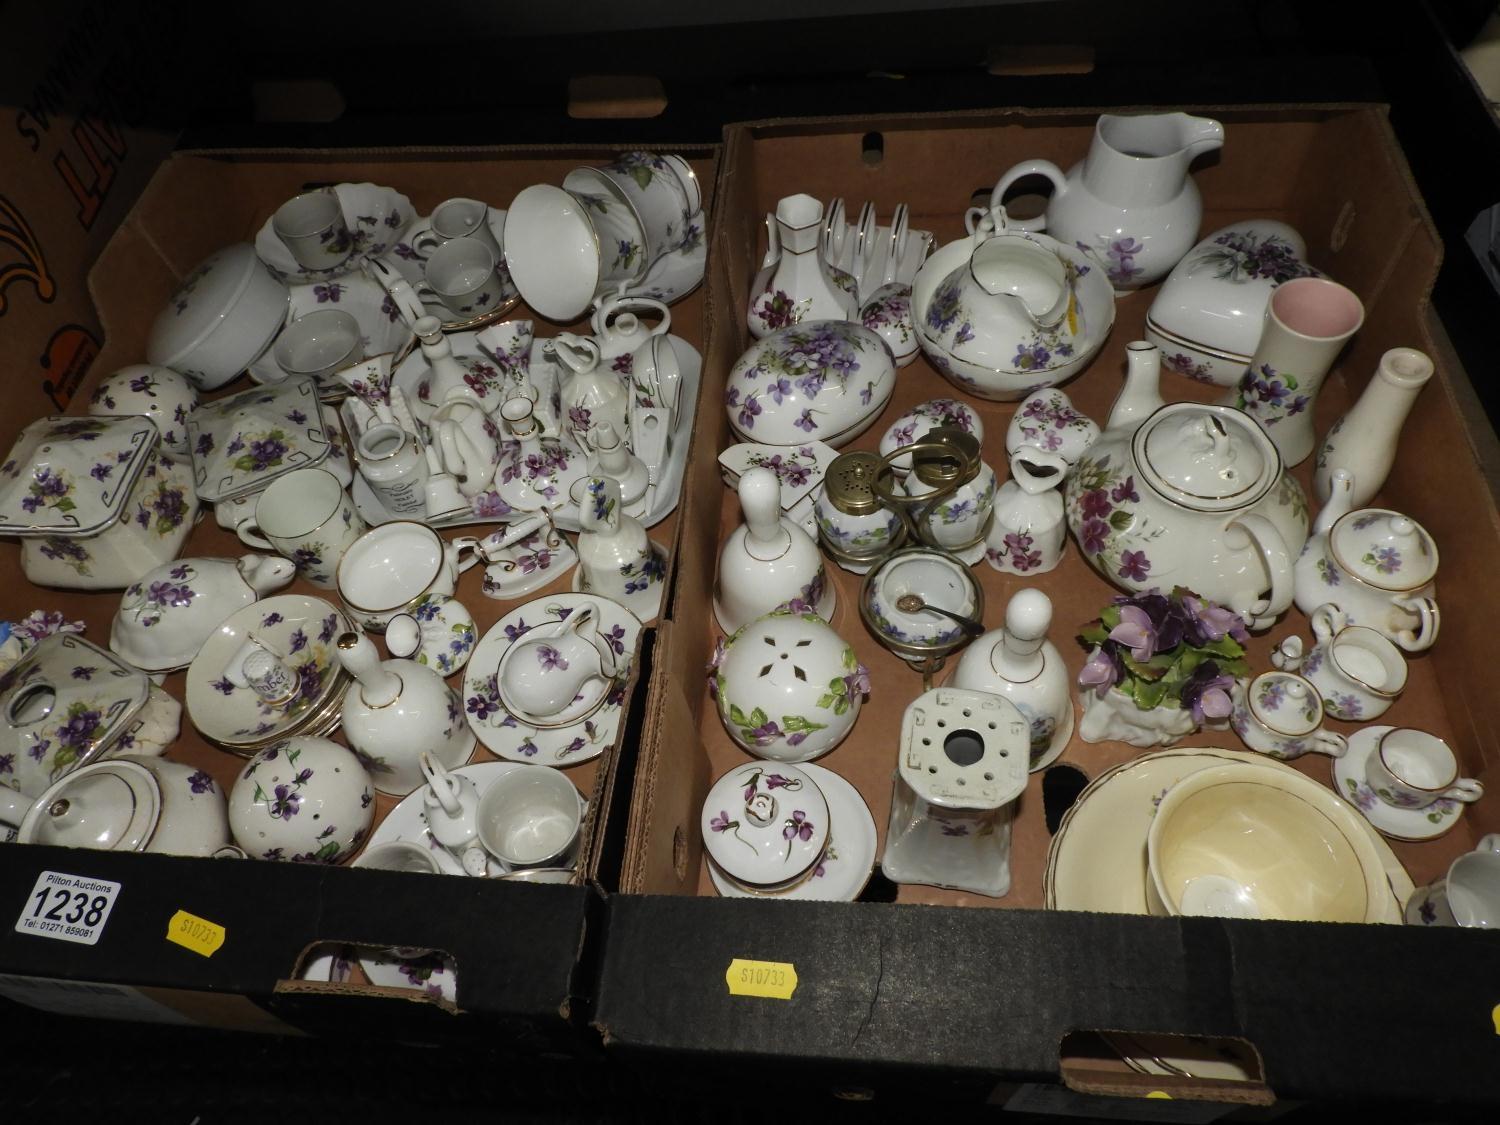 2x Boxes of Collectable China - Violets